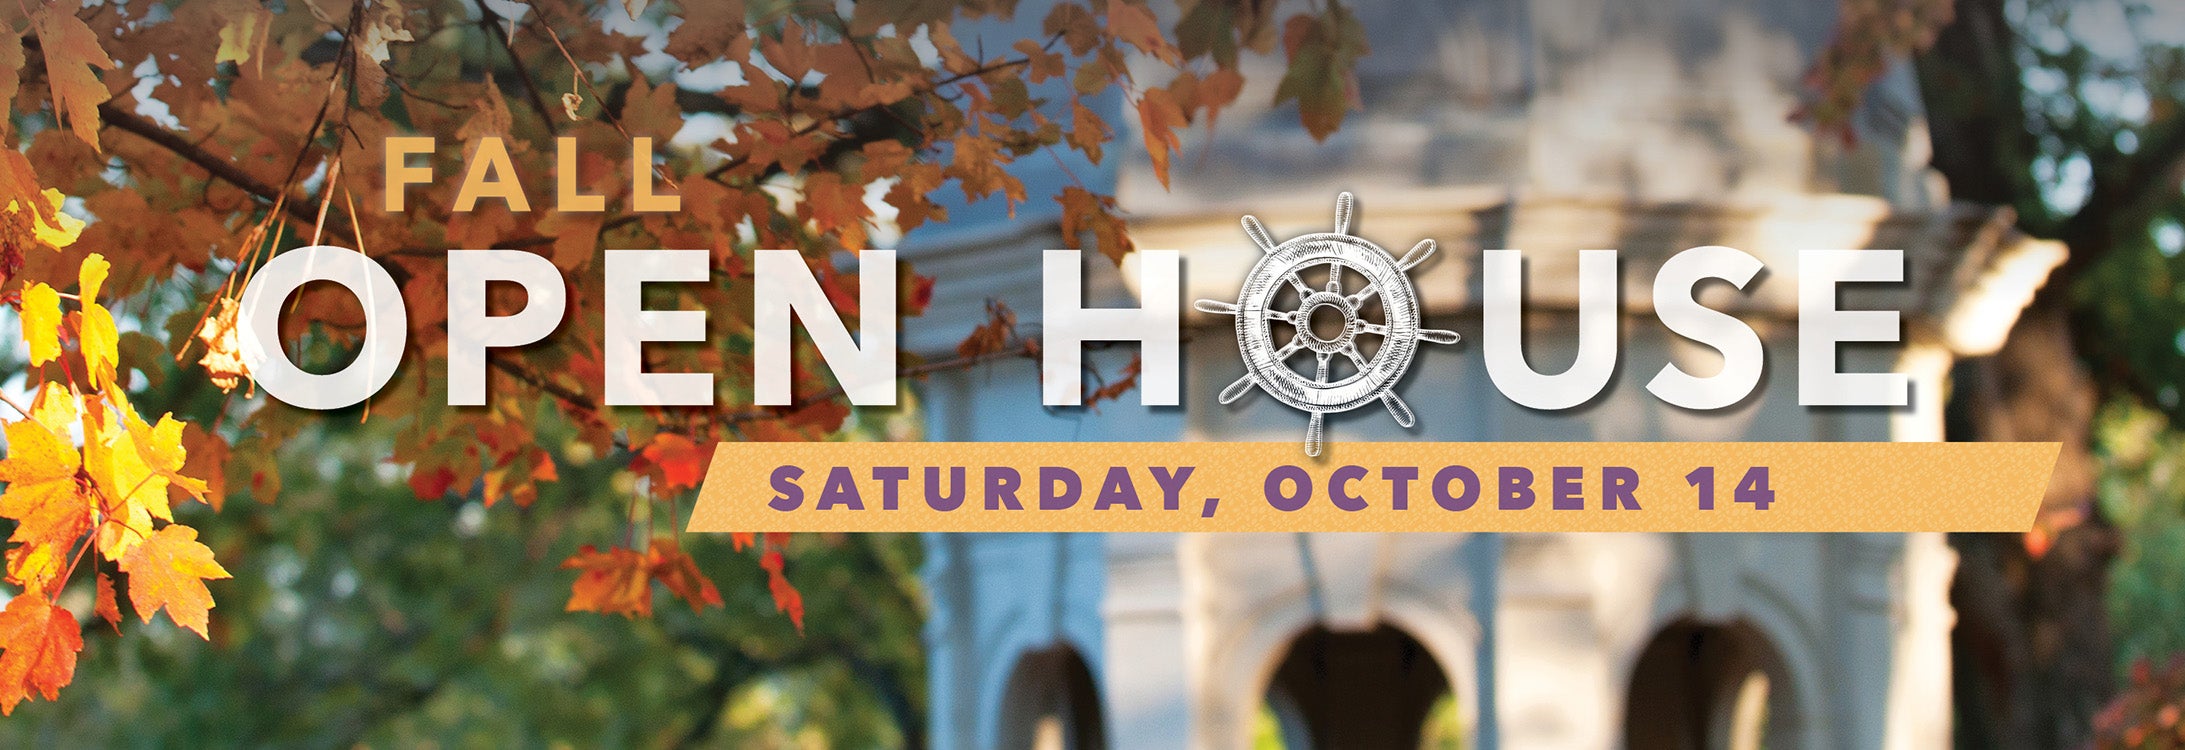 Fall Open House, Saturday, October 4